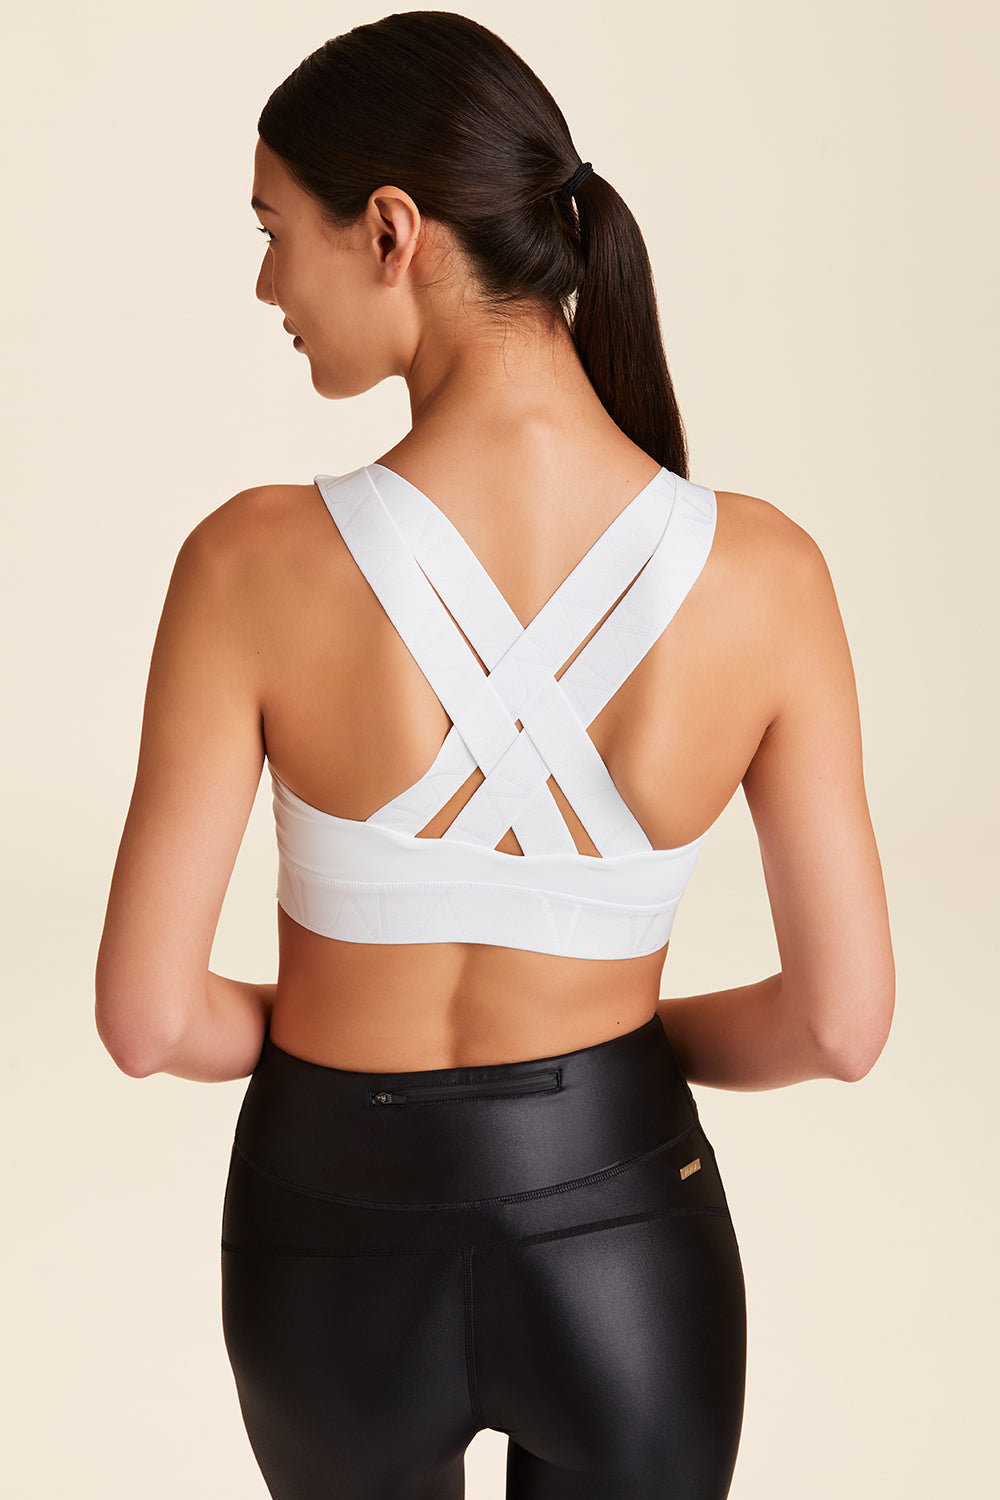 Back view of Alala Women's Luxury Athleisure white sports bra with cross back straps